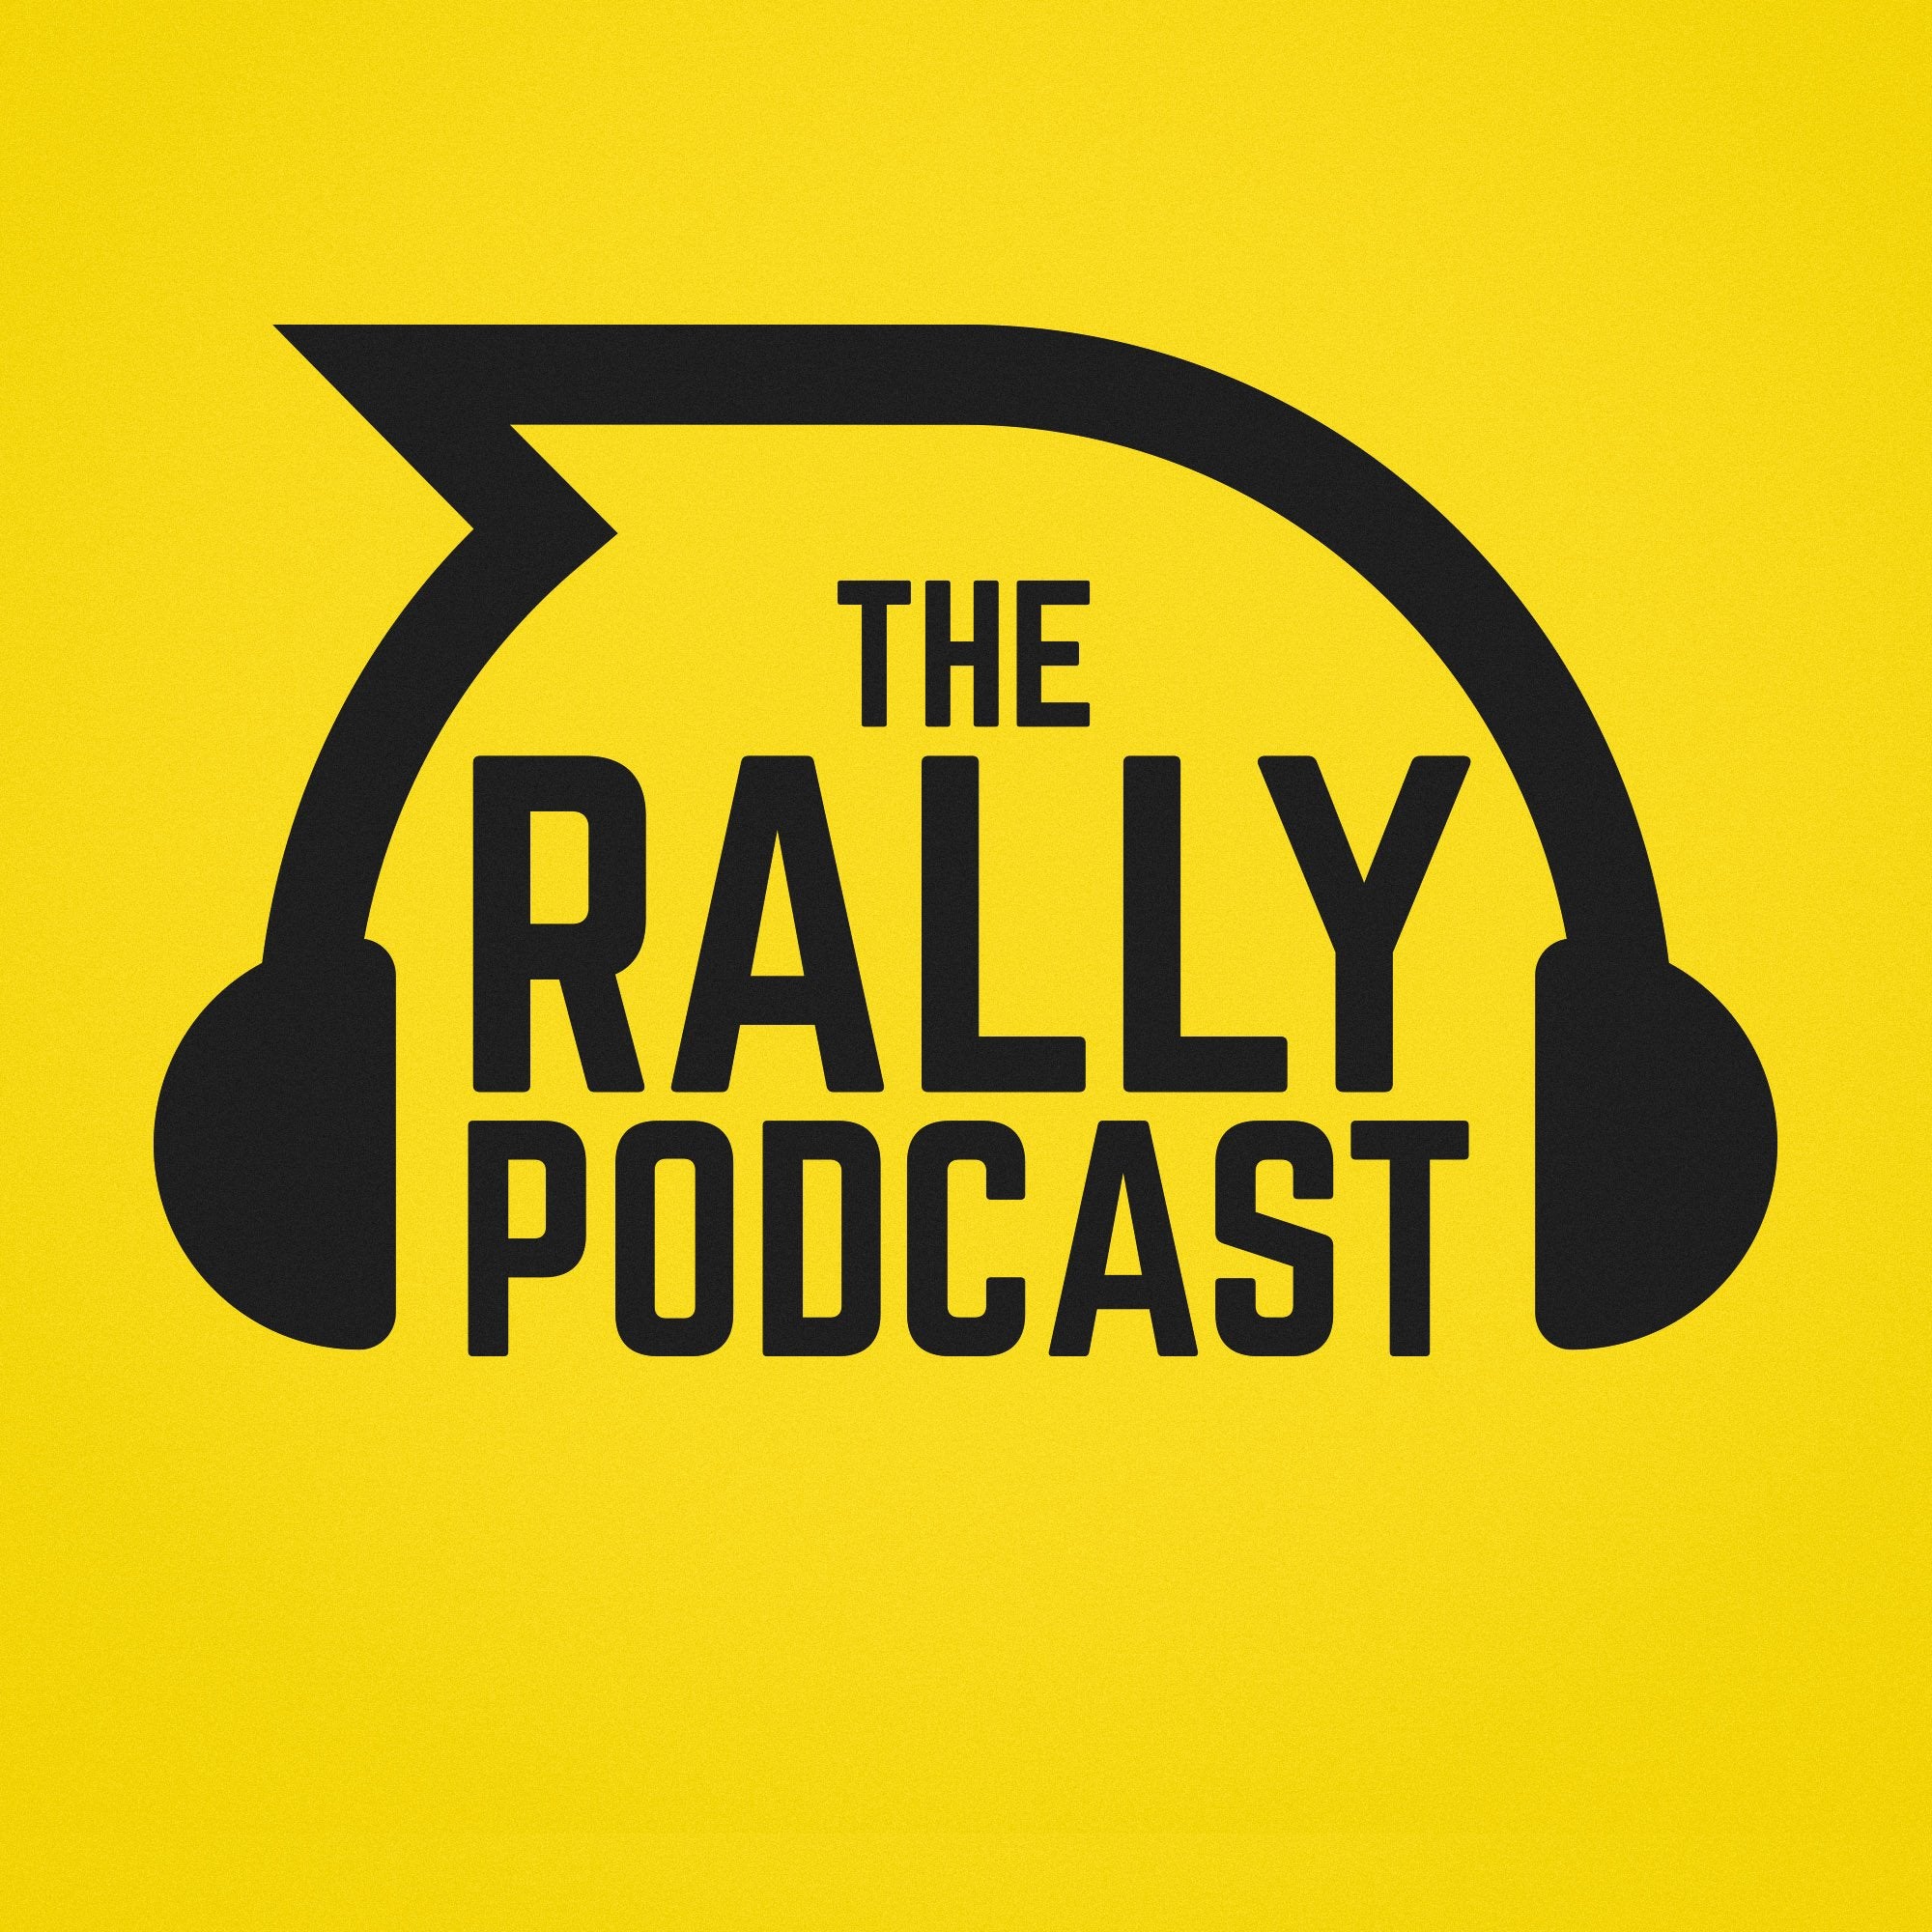 The Rally Podcast - 2018 Season, Episode 7 - SpikeBuoy, Playing Surfaces, and College Sectionals